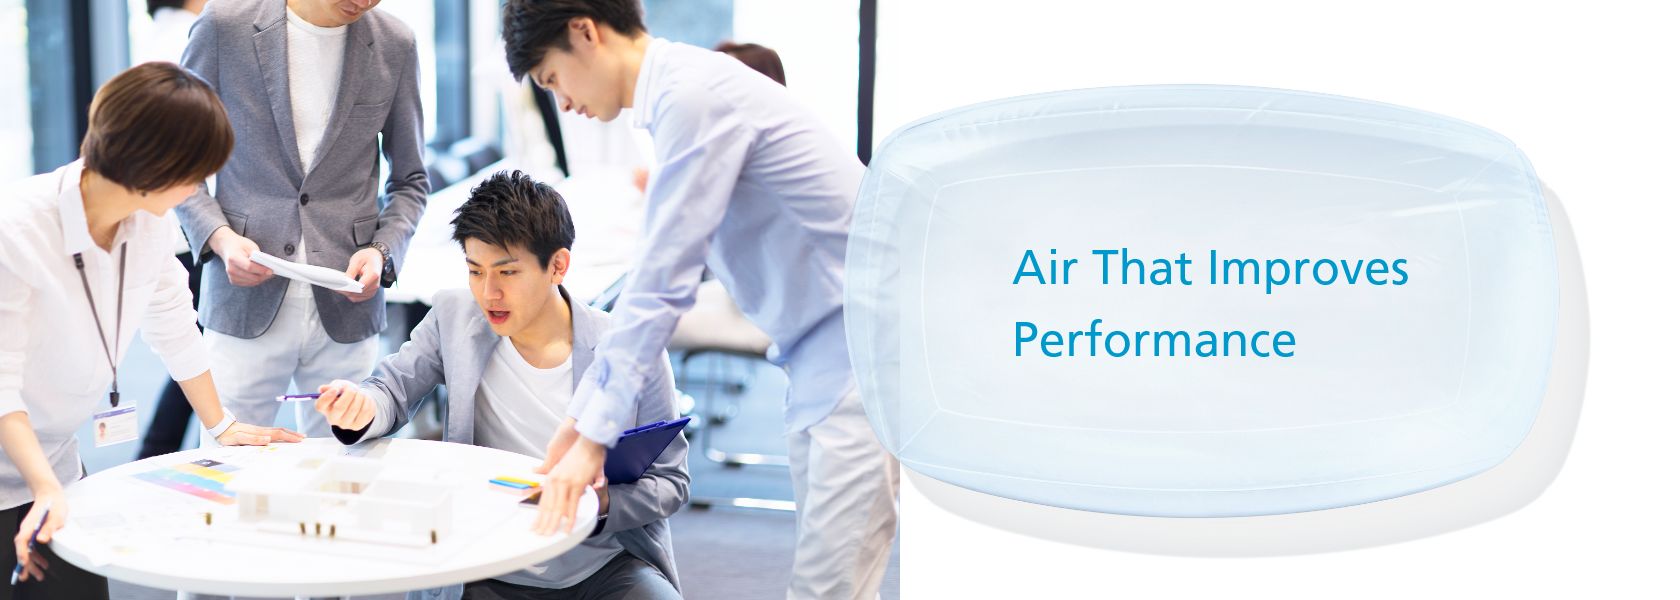 Air That Improves Performance